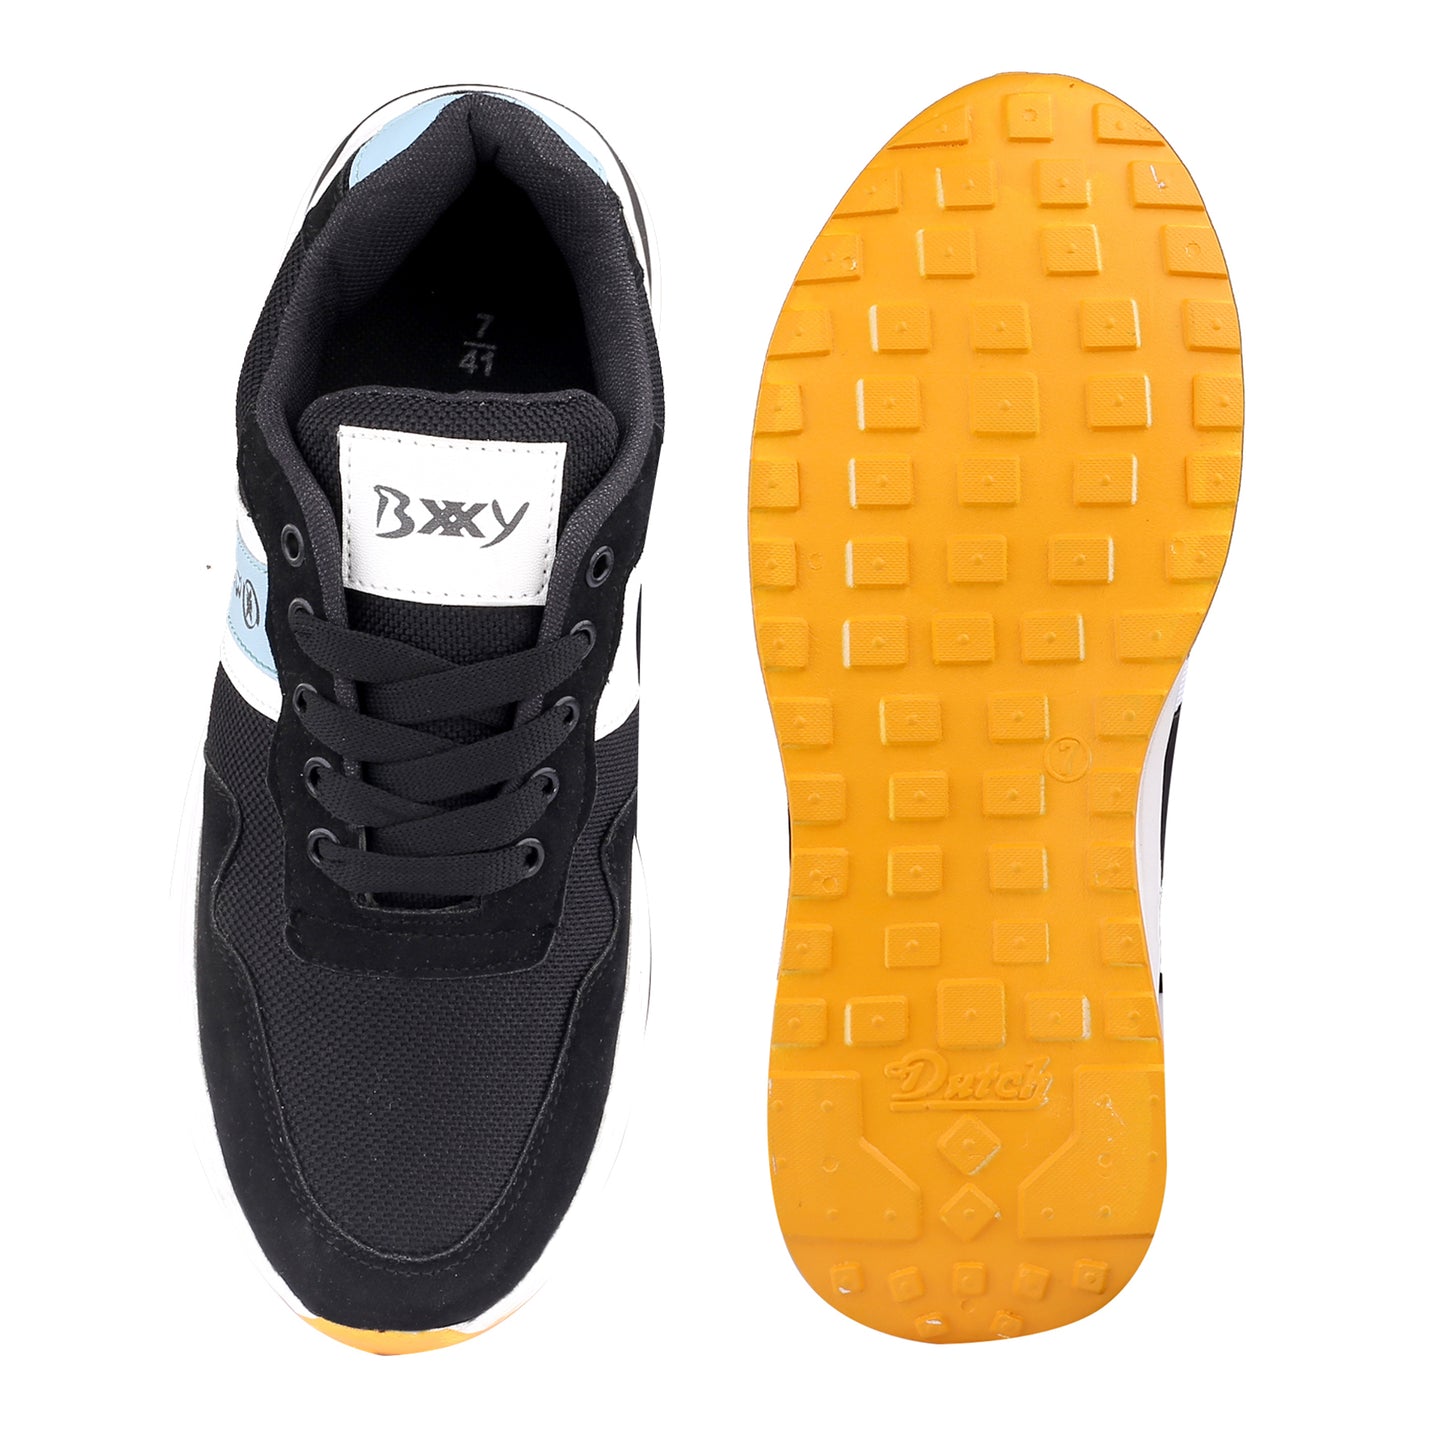 Bxxy's High-end Fashionable Casual Lace-up Shoes for all Seasons